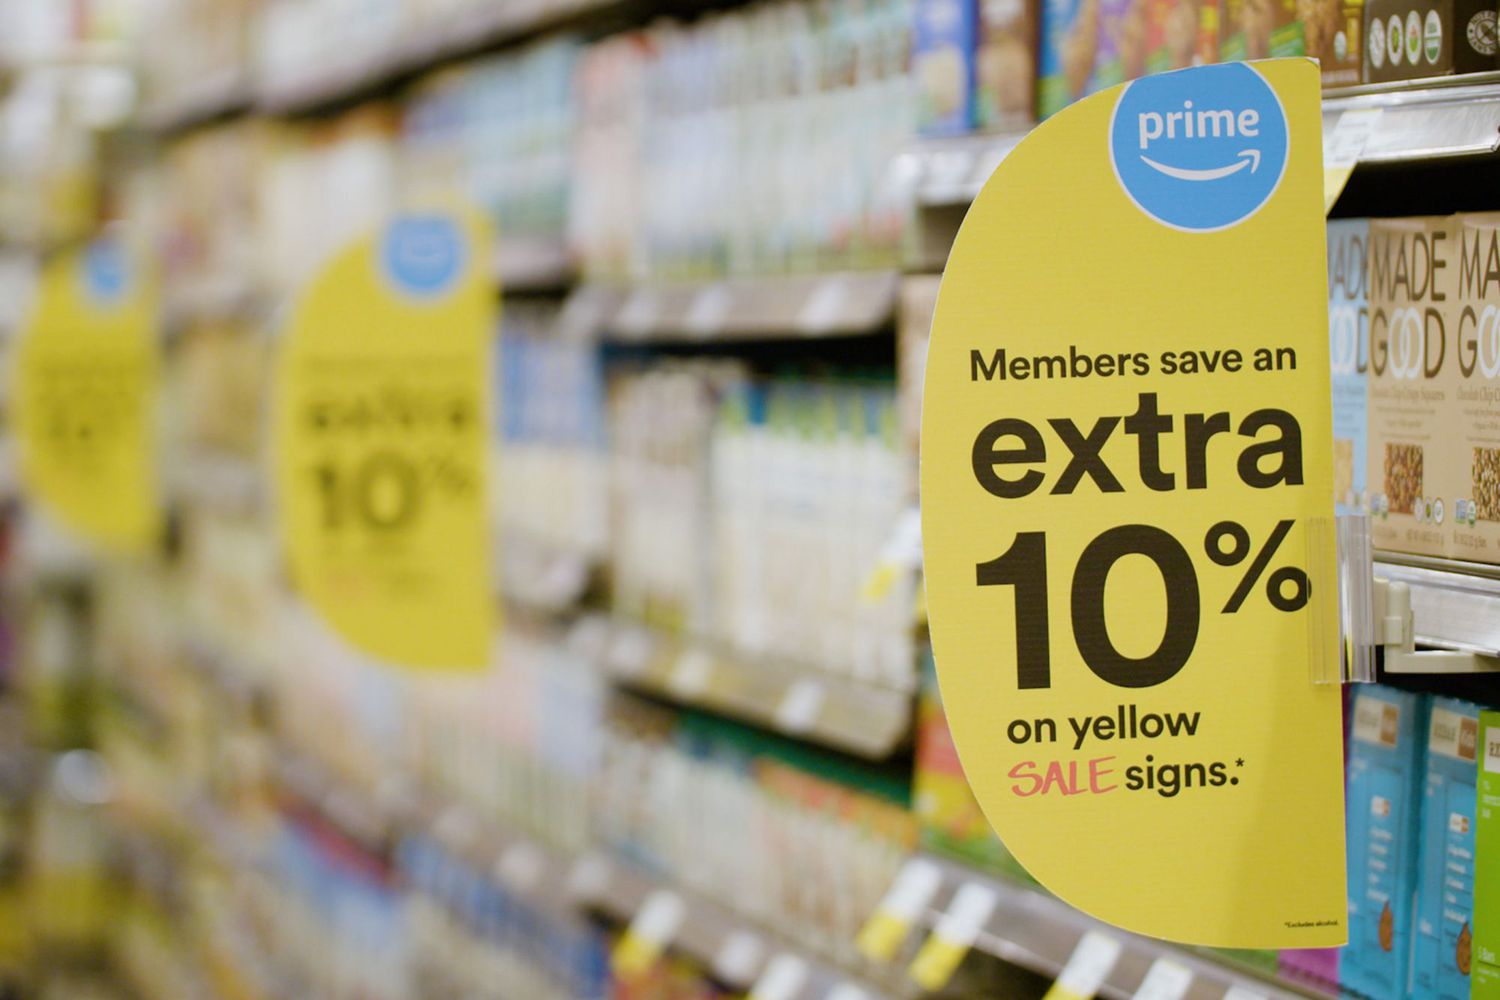 How To Get Amazon Prime Discount At Whole Foods